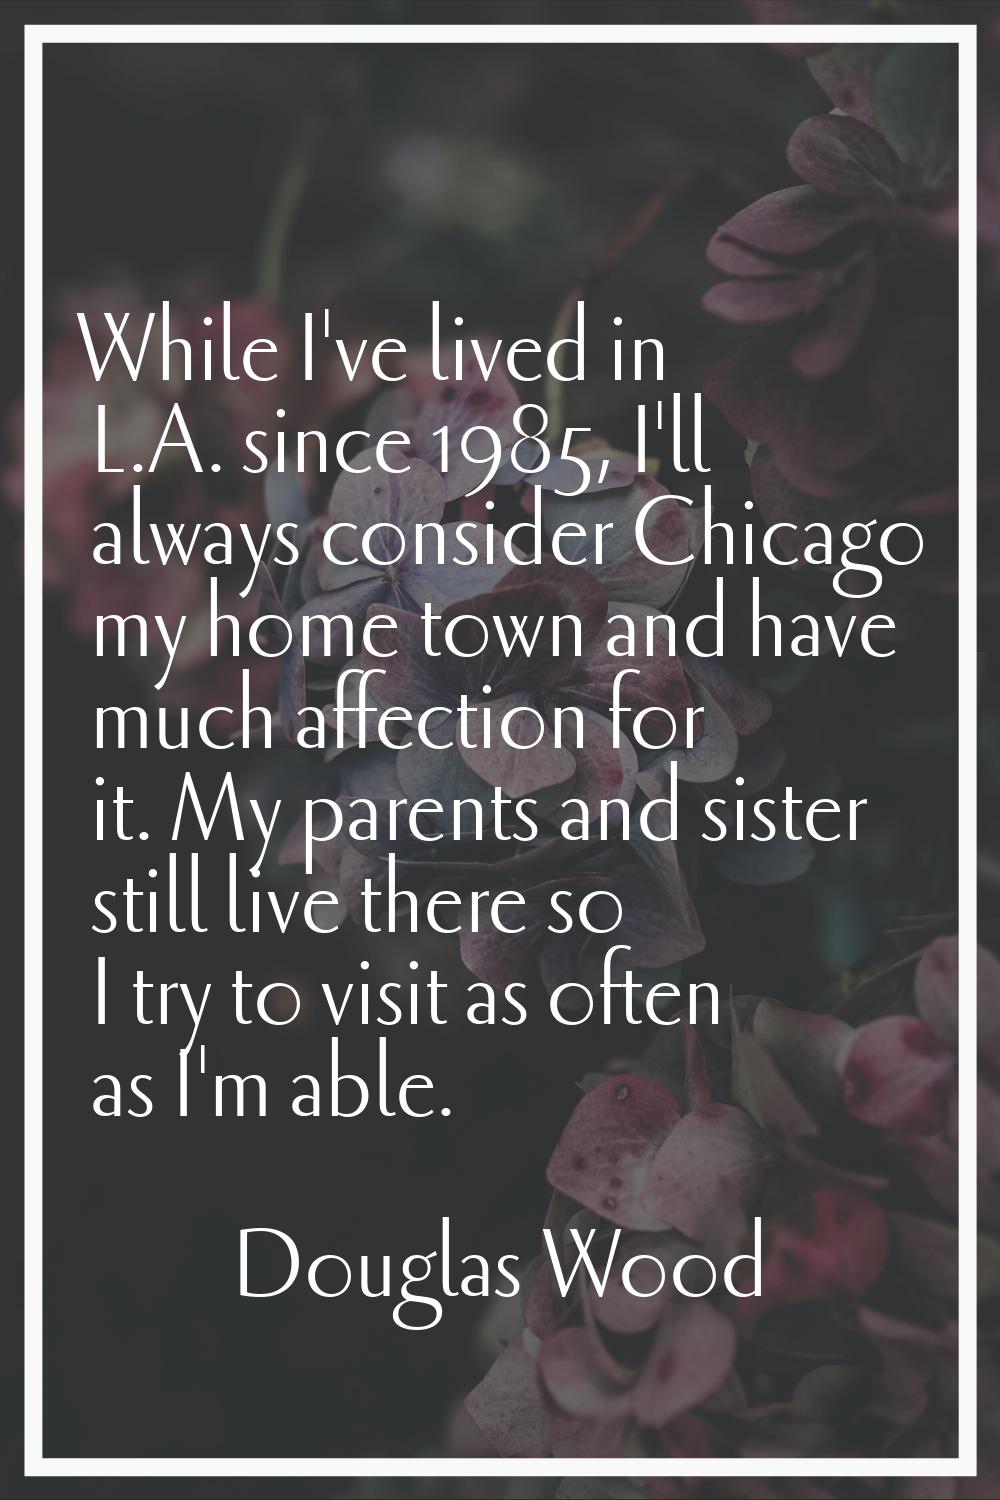 While I've lived in L.A. since 1985, I'll always consider Chicago my home town and have much affect